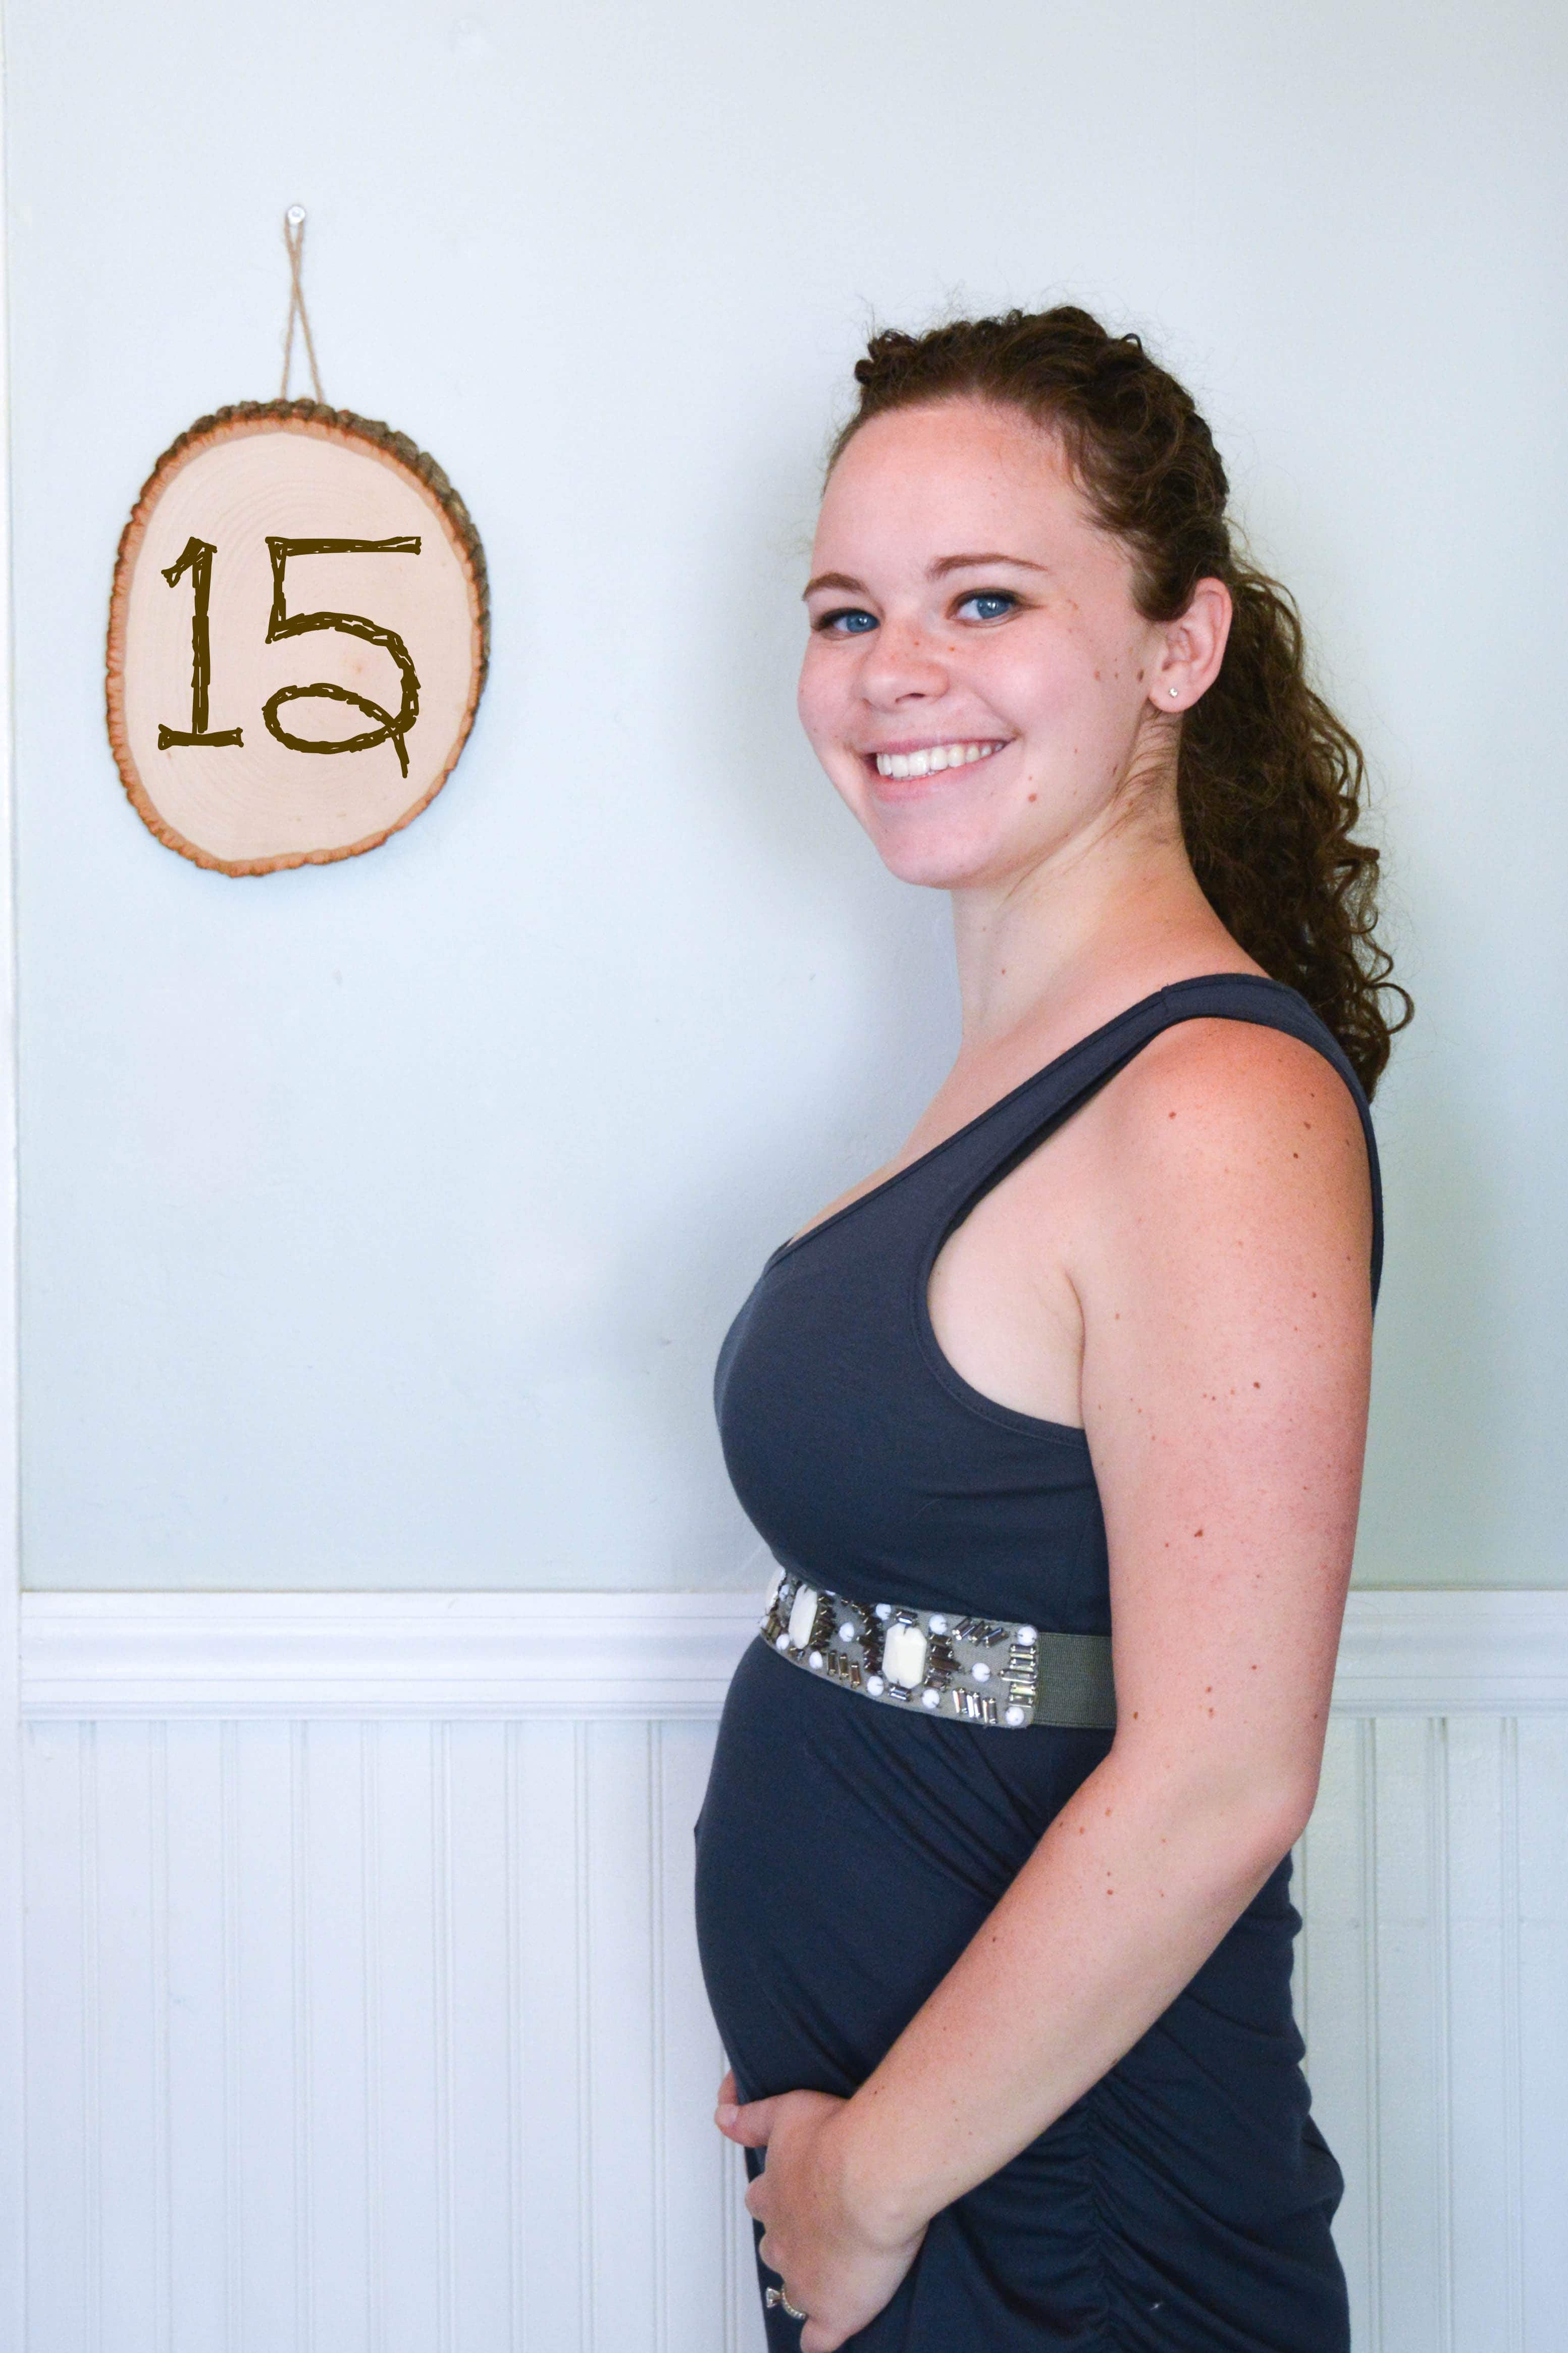 15 Weeks Pregnant with Twins